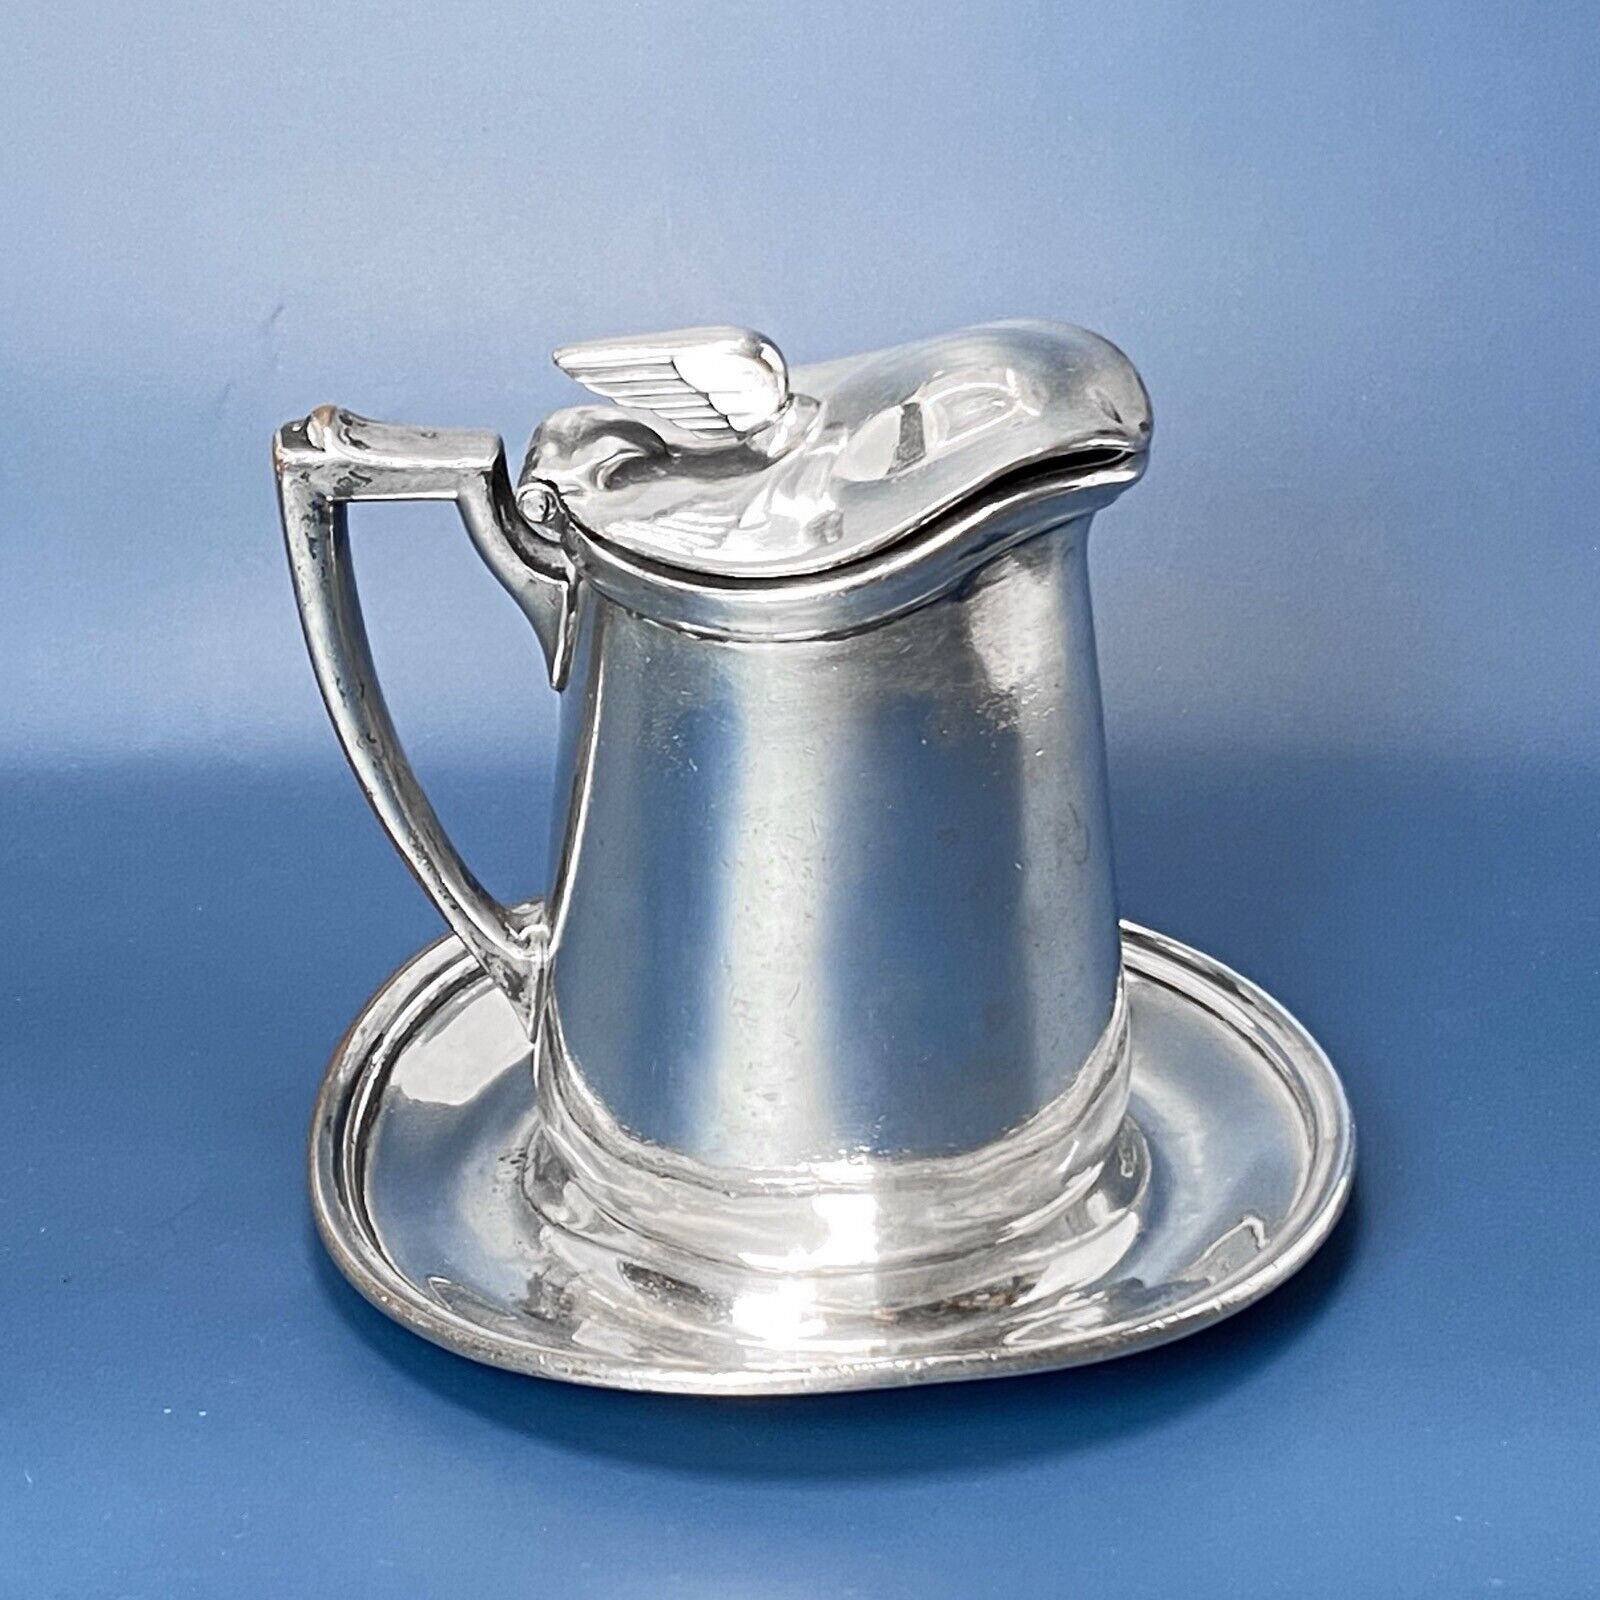 Union Pacific Railroad Silver Soldered Creamer Pitcher By Reed & Barton